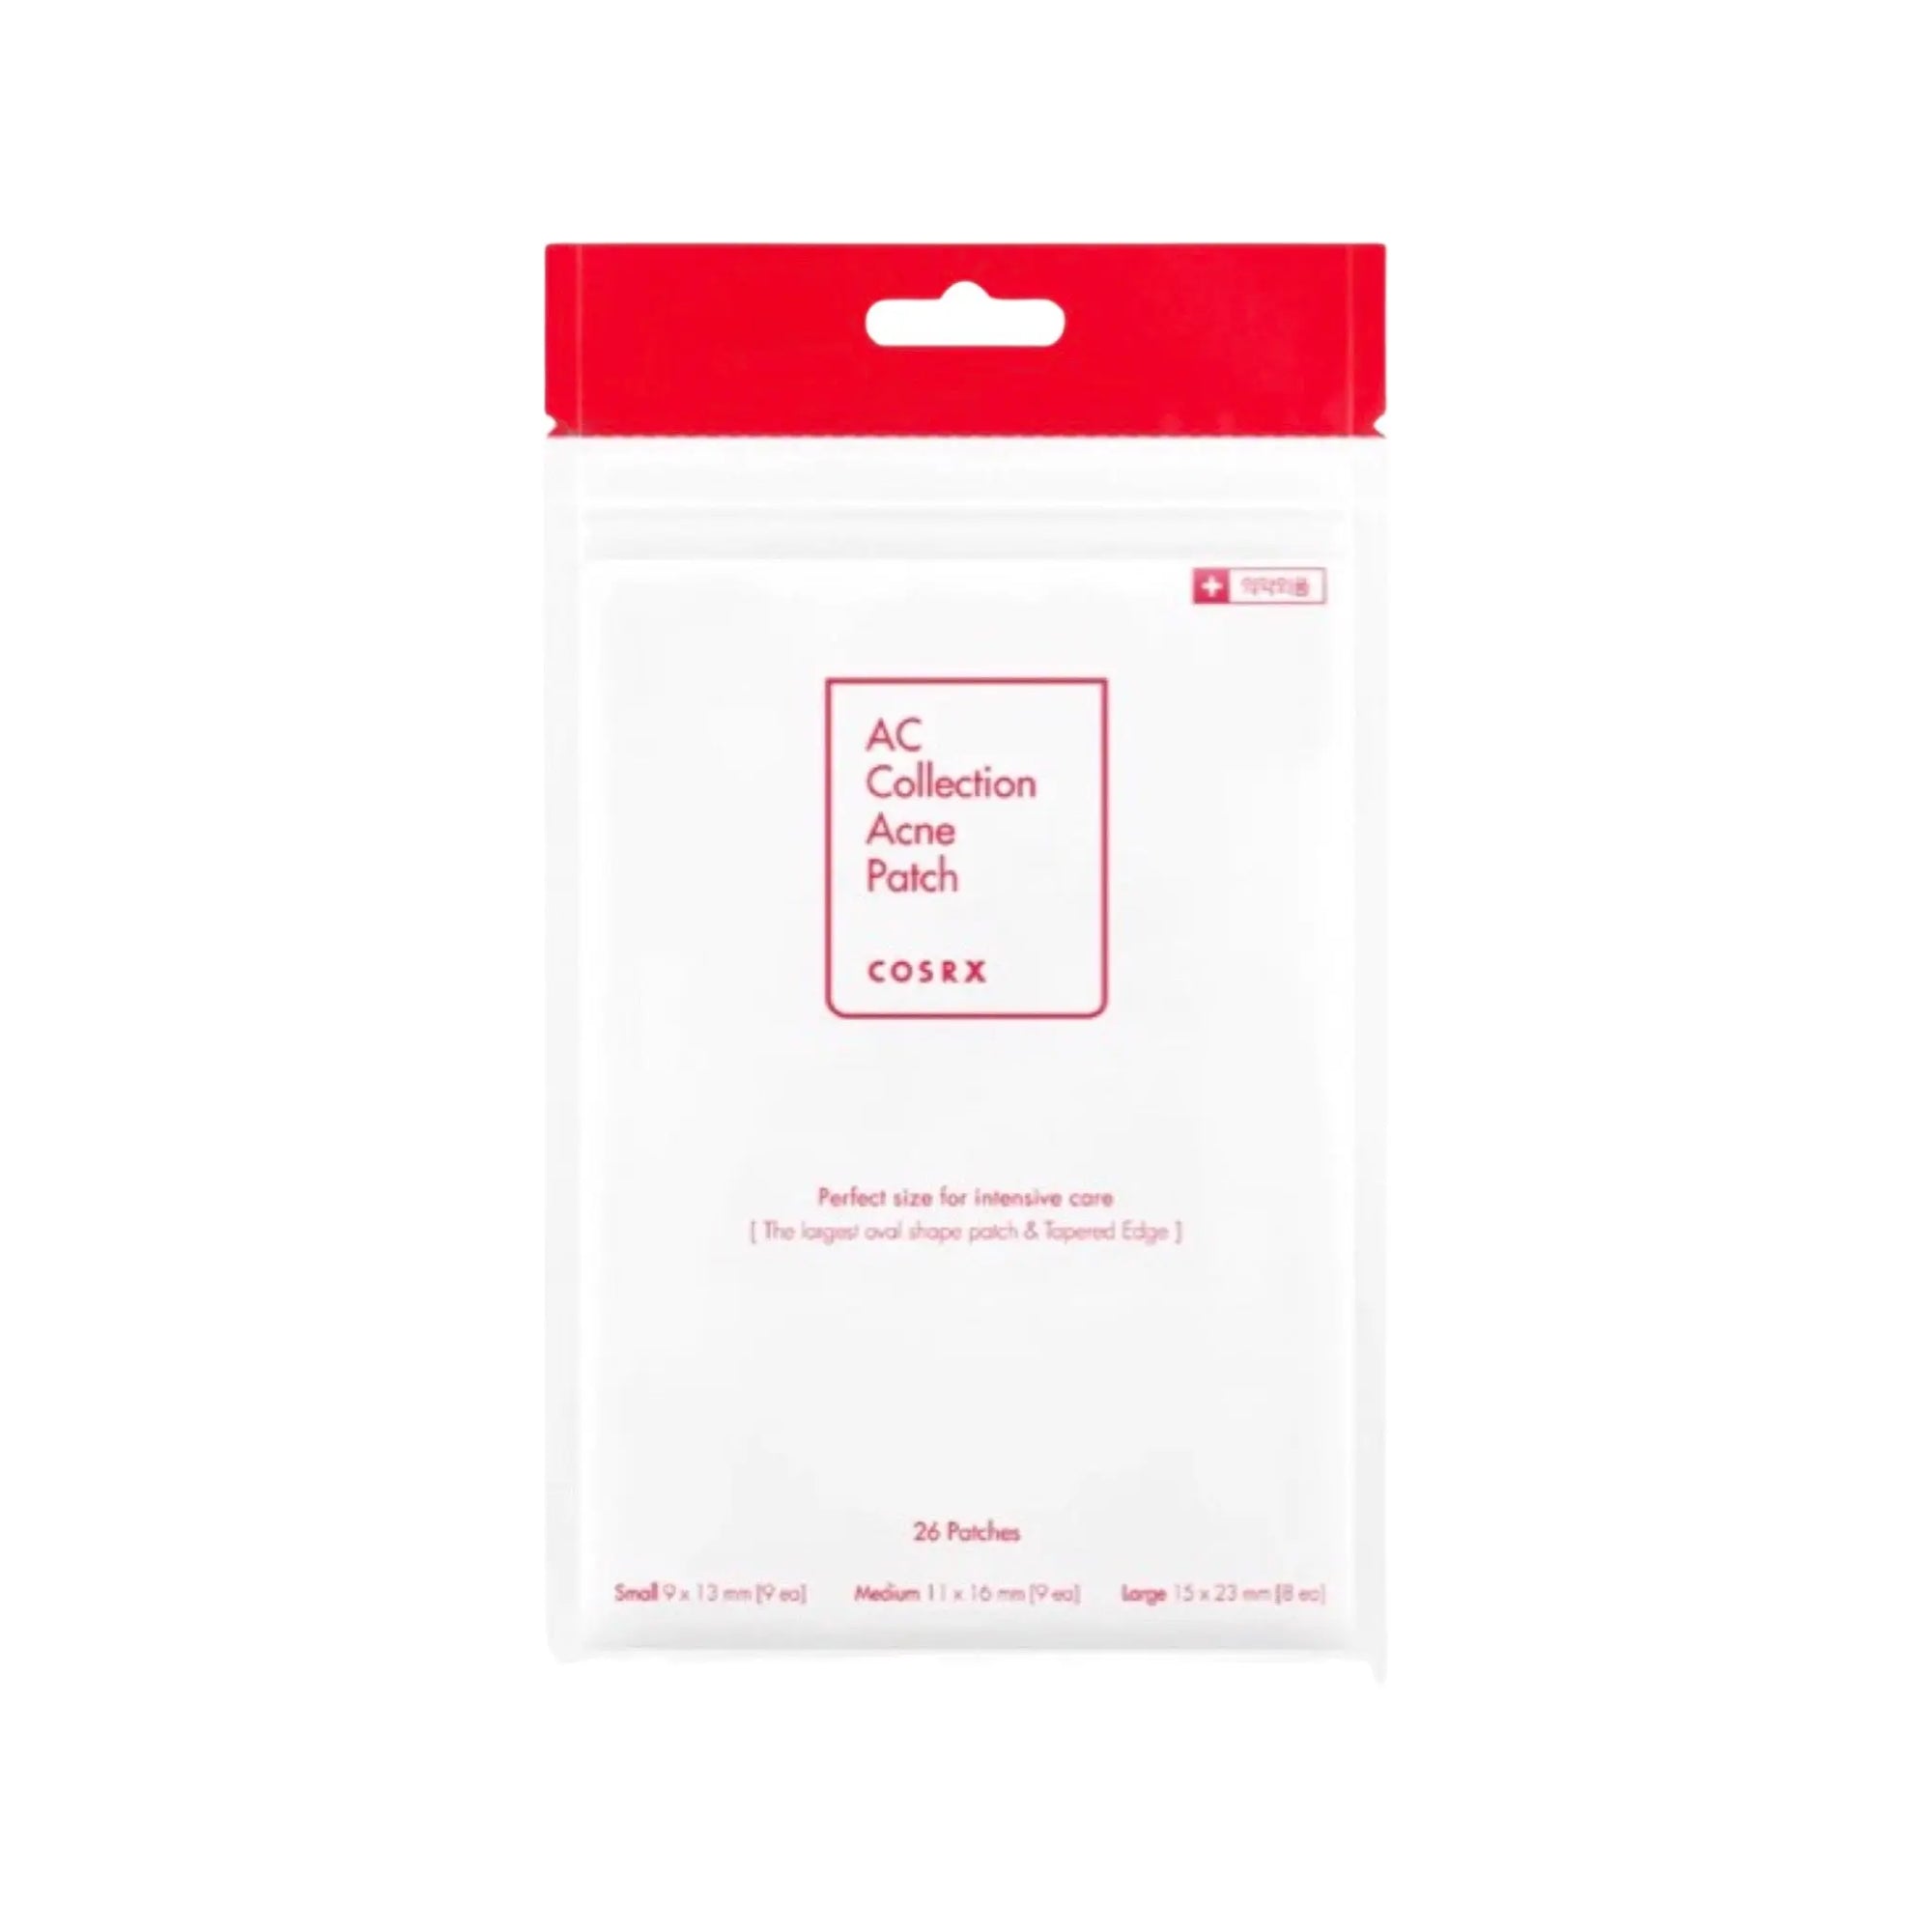 COSRX - AC Collection Acne Patch (26 patches) WanderShop